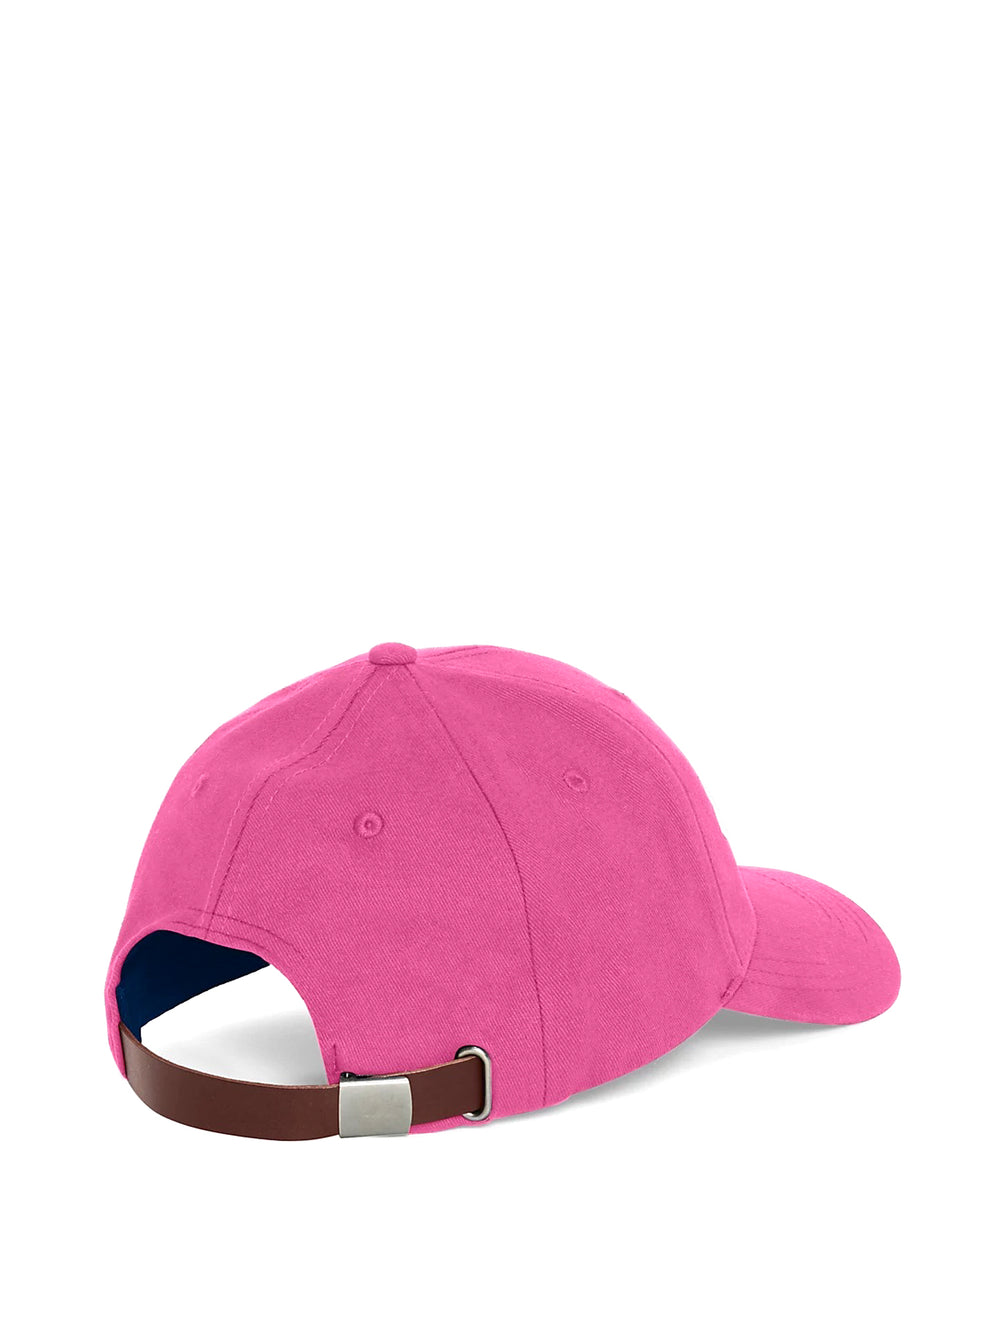 CLASSIC TWILL HAT - PEONY - CLEARANCE